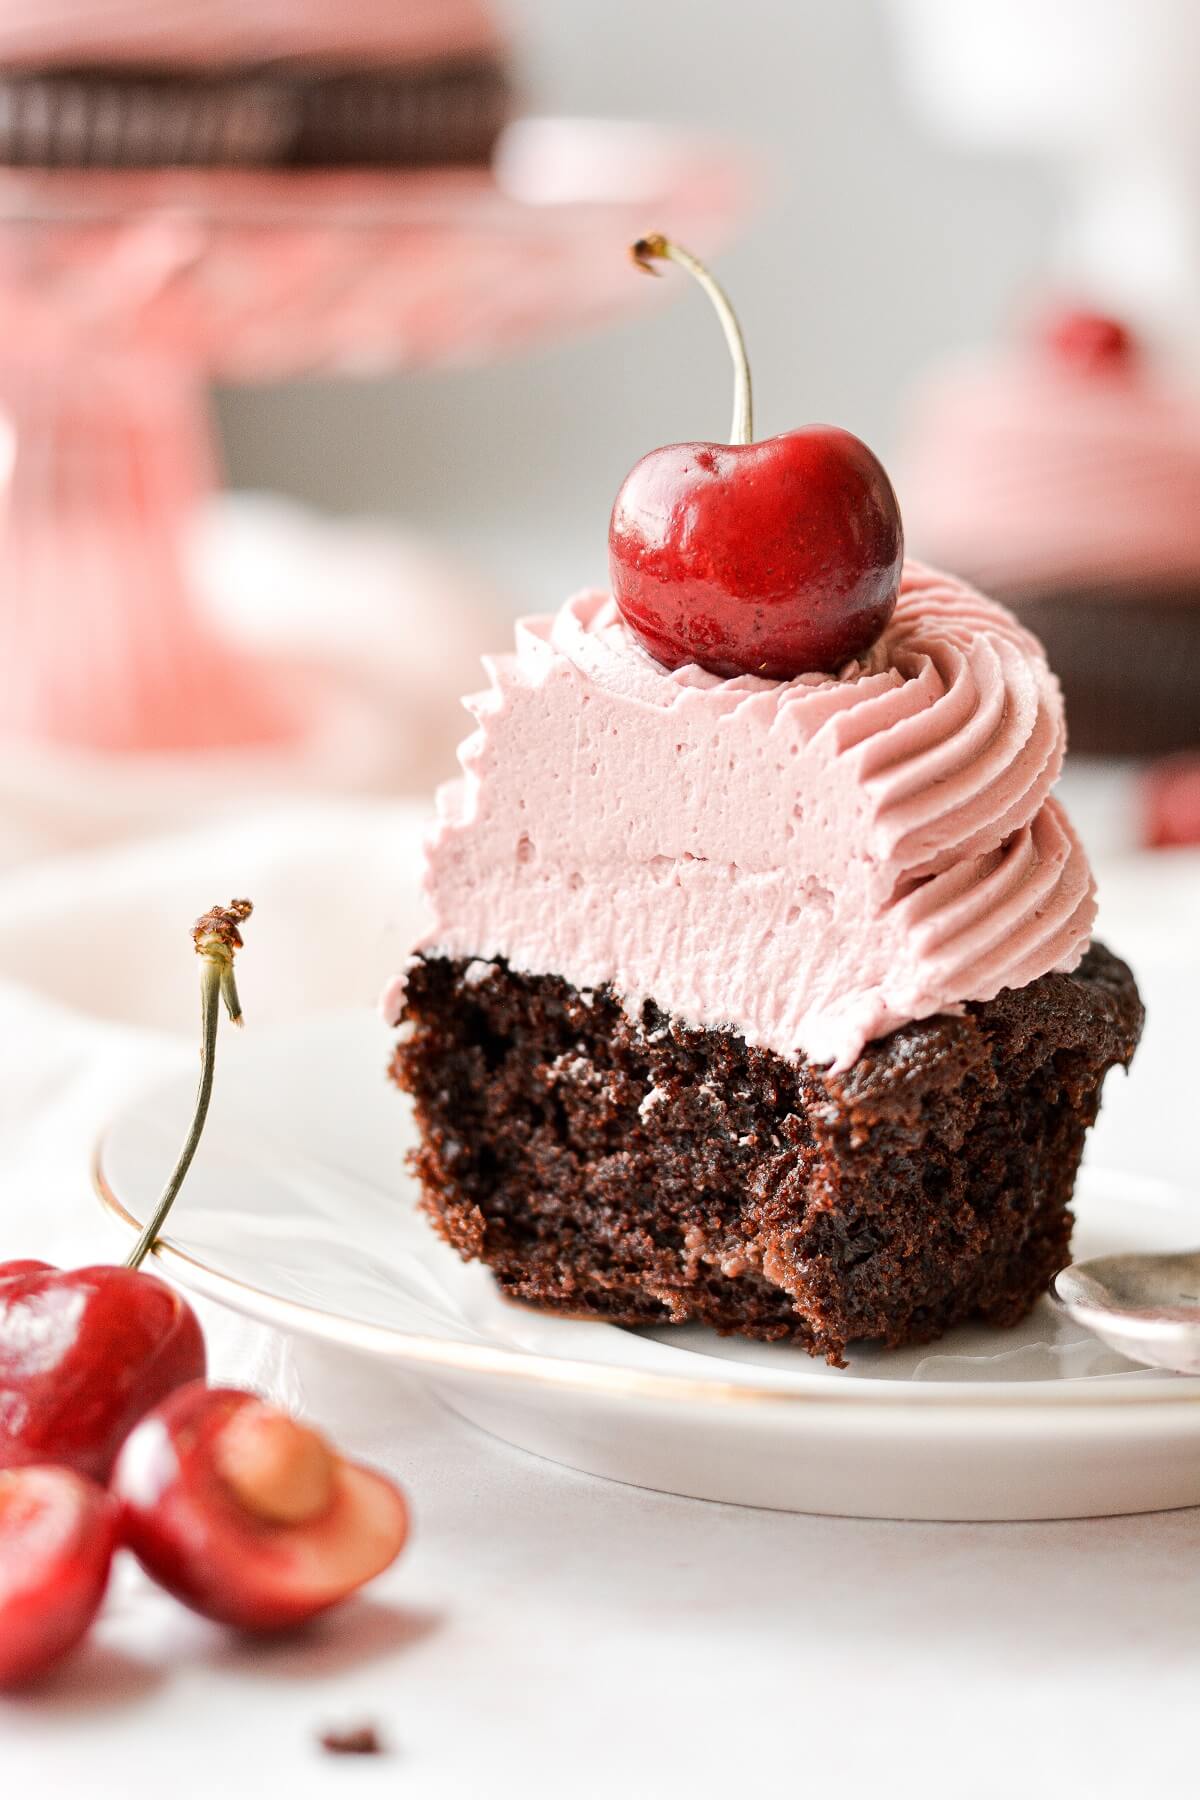 A chocolate cherry cupcake with a bite taken.